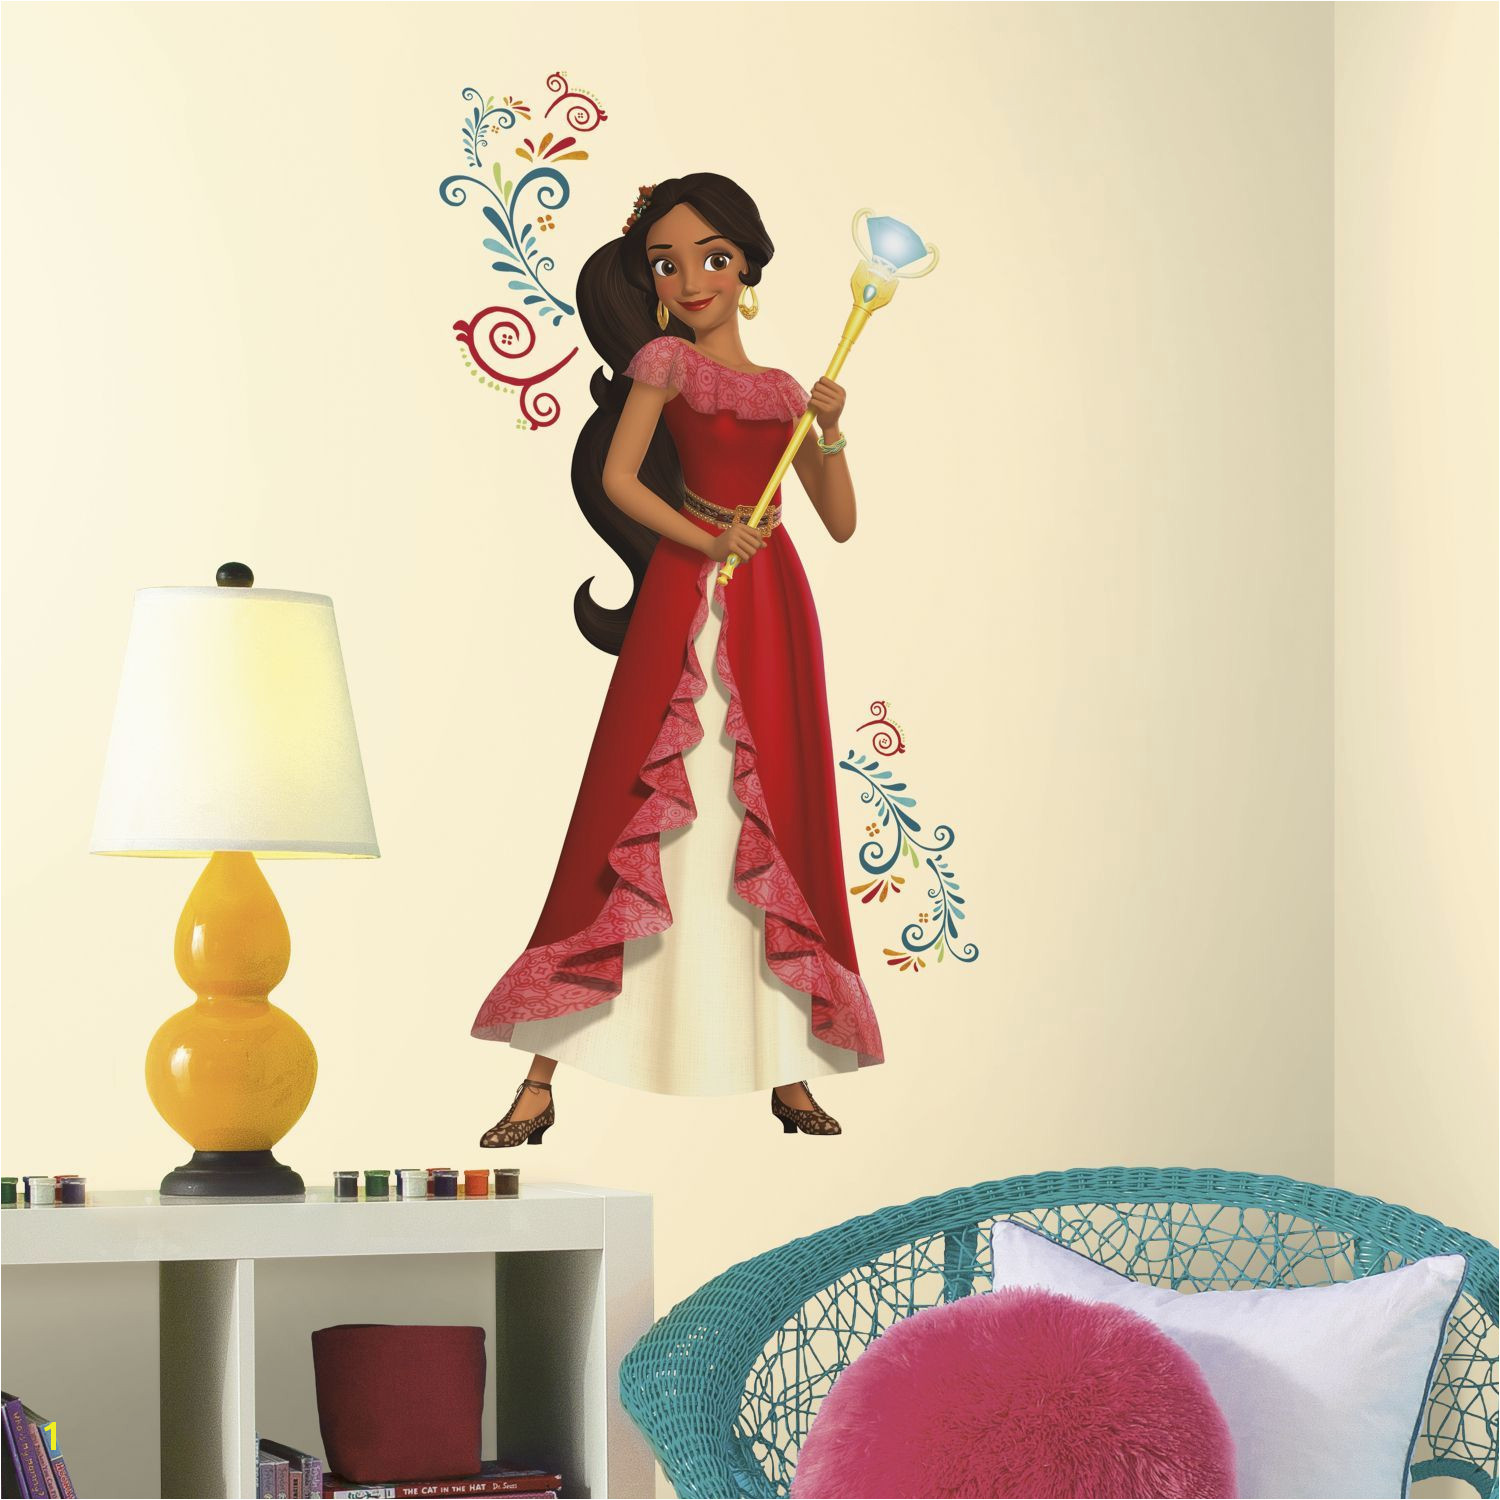 Roommates Wall Murals Princess Elena Of Avalor Multicolored Peel and Stick Wall Decals by